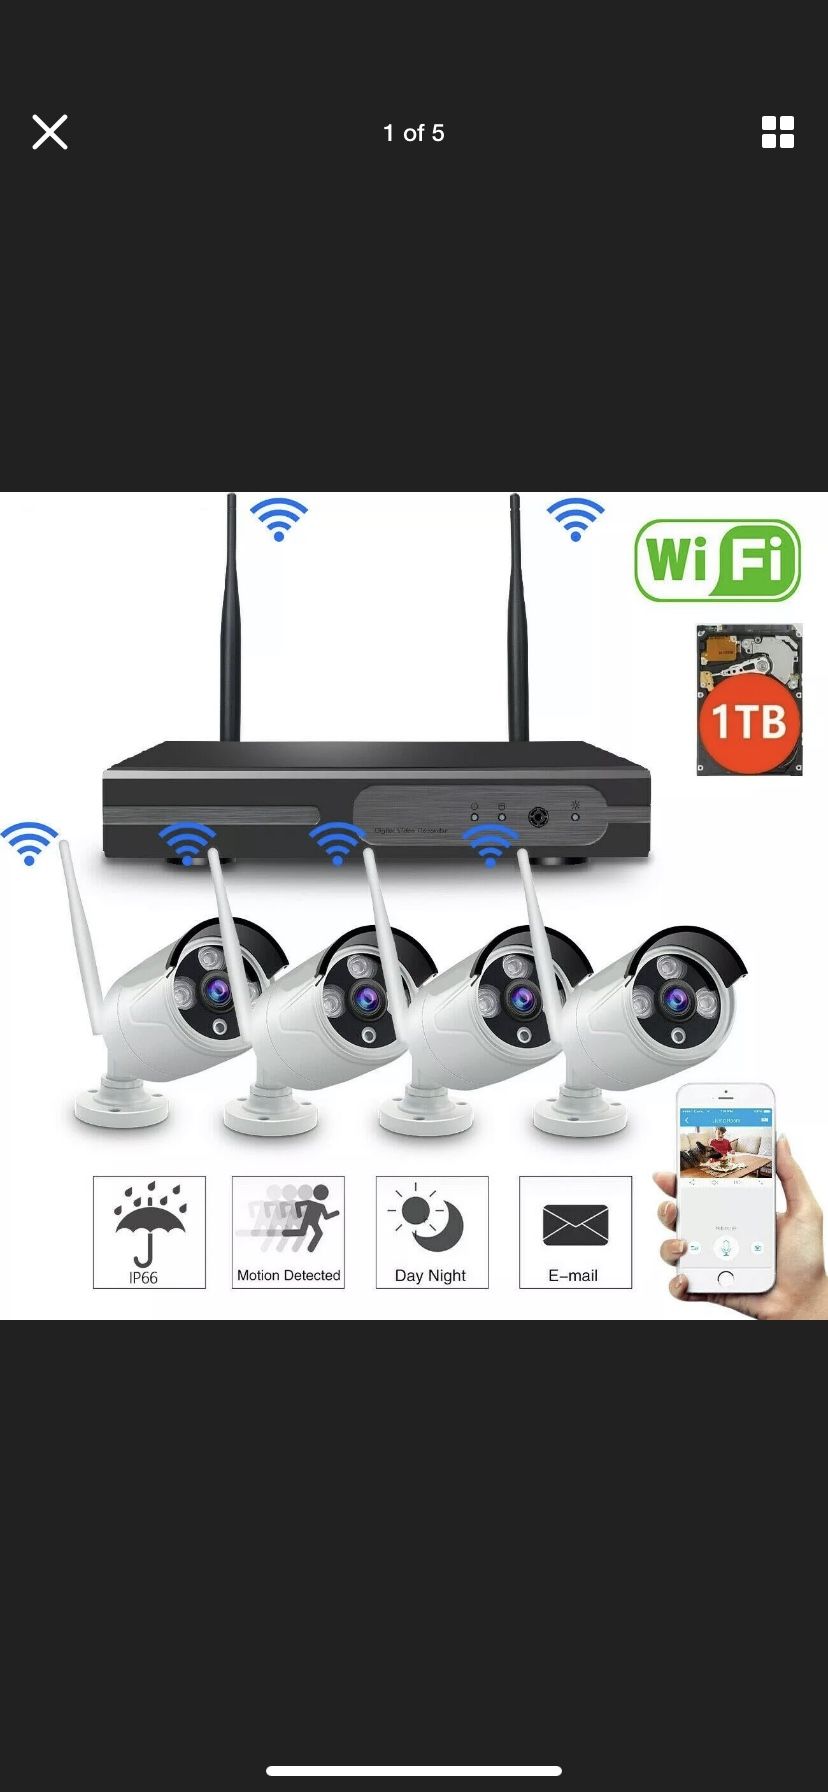 [1TB Hard Drive Pre-Install] 720P Security Camera System Wireless